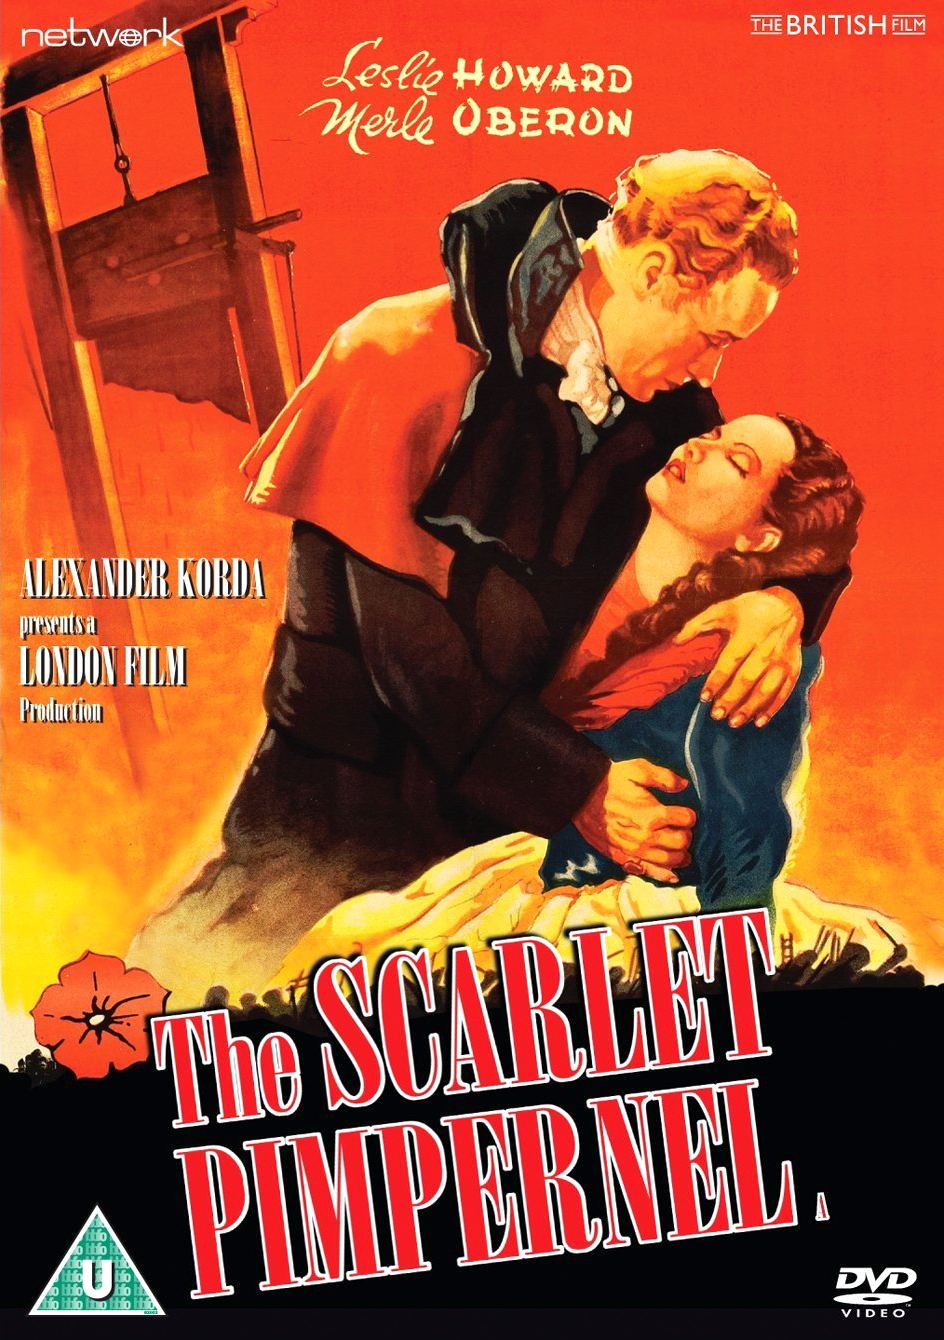 The Scarlet Pimpernel DVD from Network and the British Film